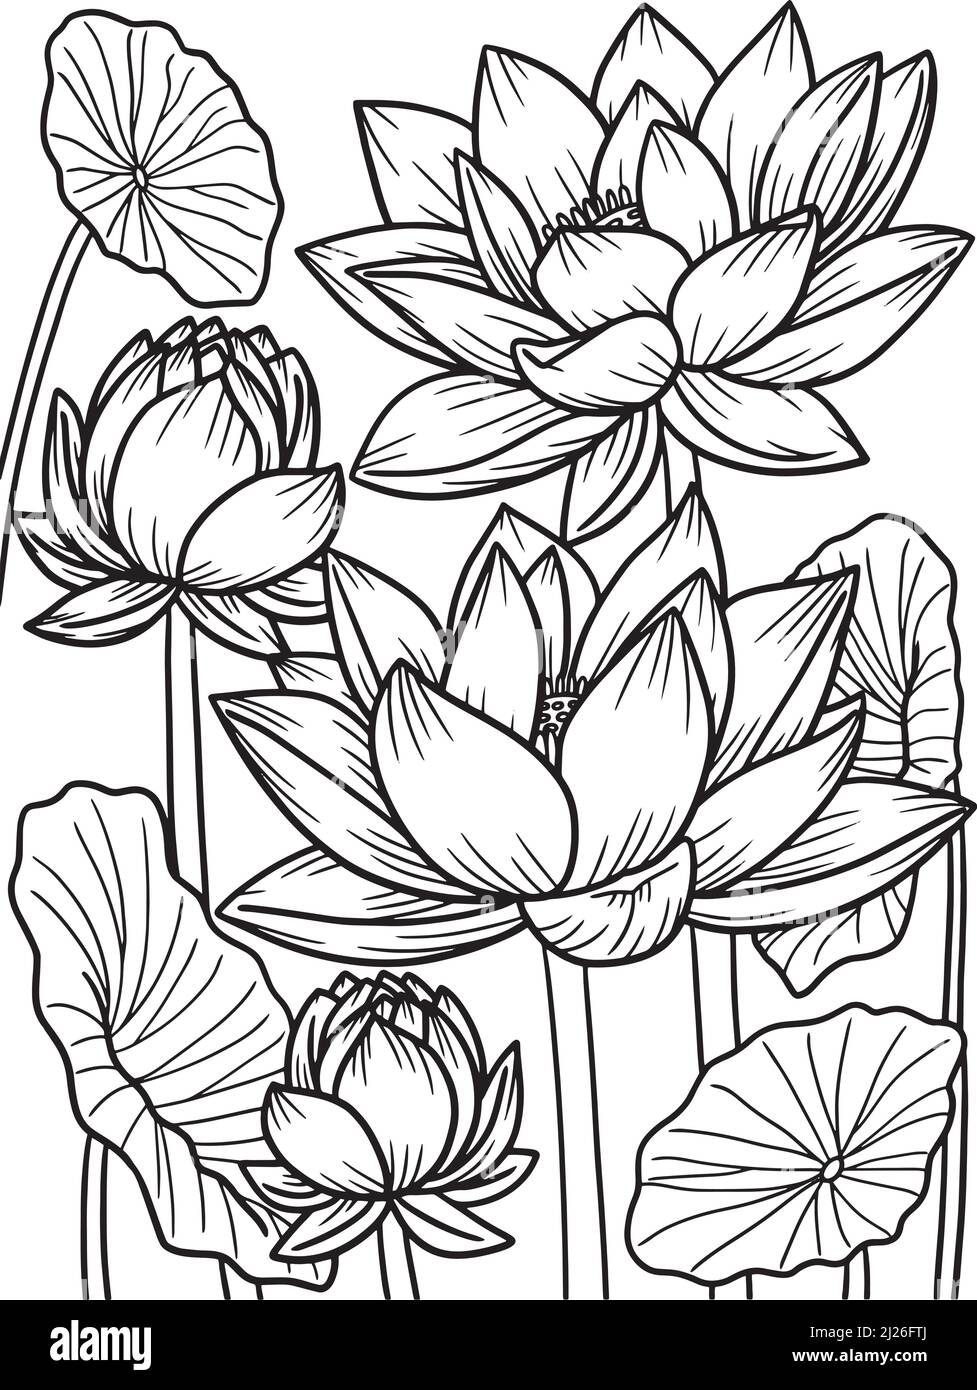 Lotus flower coloring page for adults stock vector image art